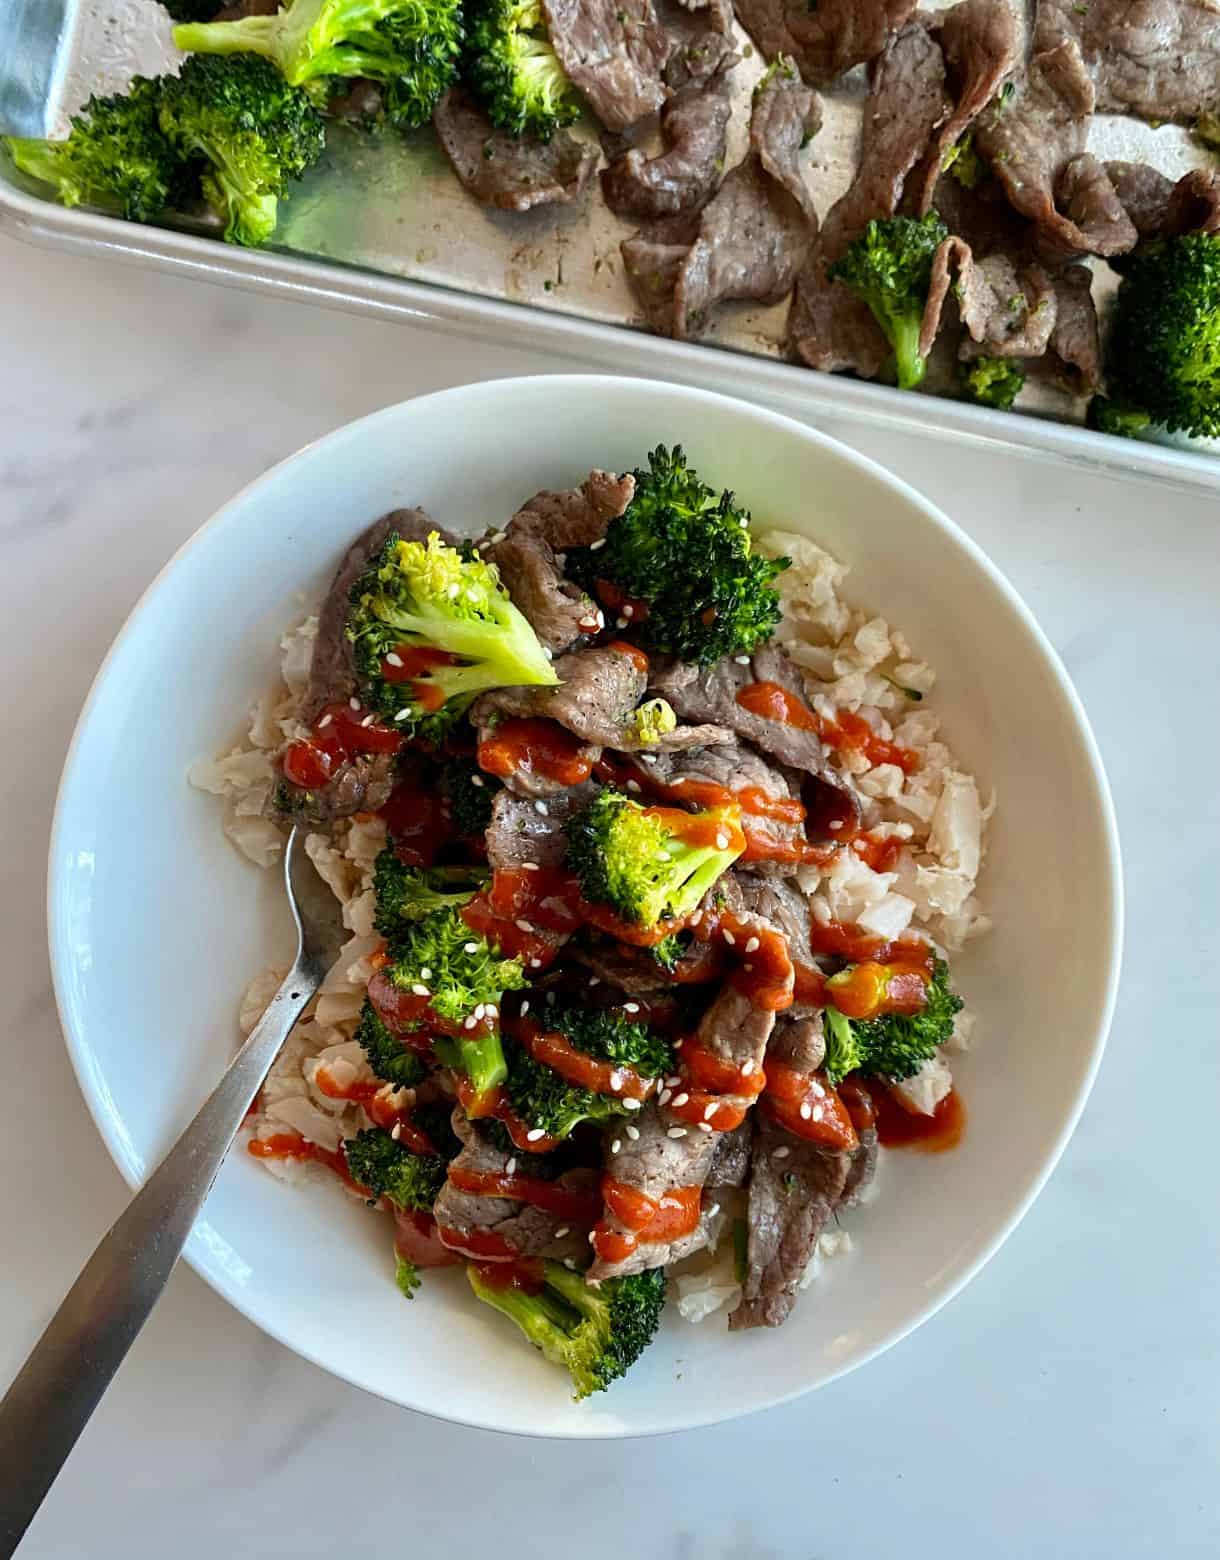 A bowl of Sheet Pan Beef and Broccoli over cauliflower rice and drizzled with sriracha sauce.